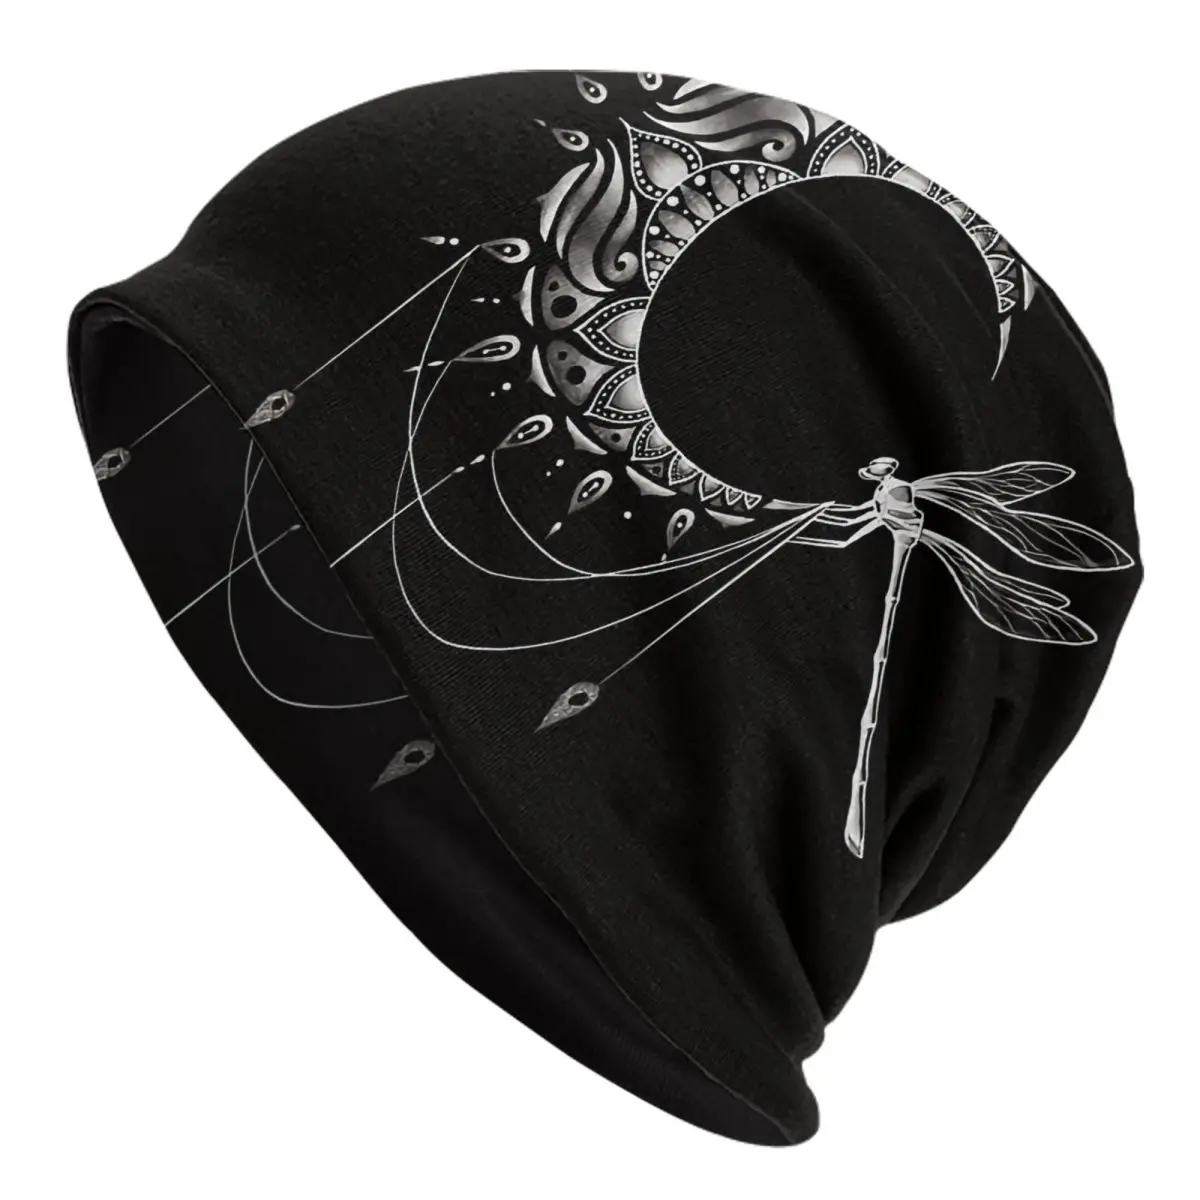 

Hat Intricate Half Crescent Moon With Dragonfly Tattoo Design Caps For Men Women Gothic Beanies Ski Caps Soft Bonnet Hats